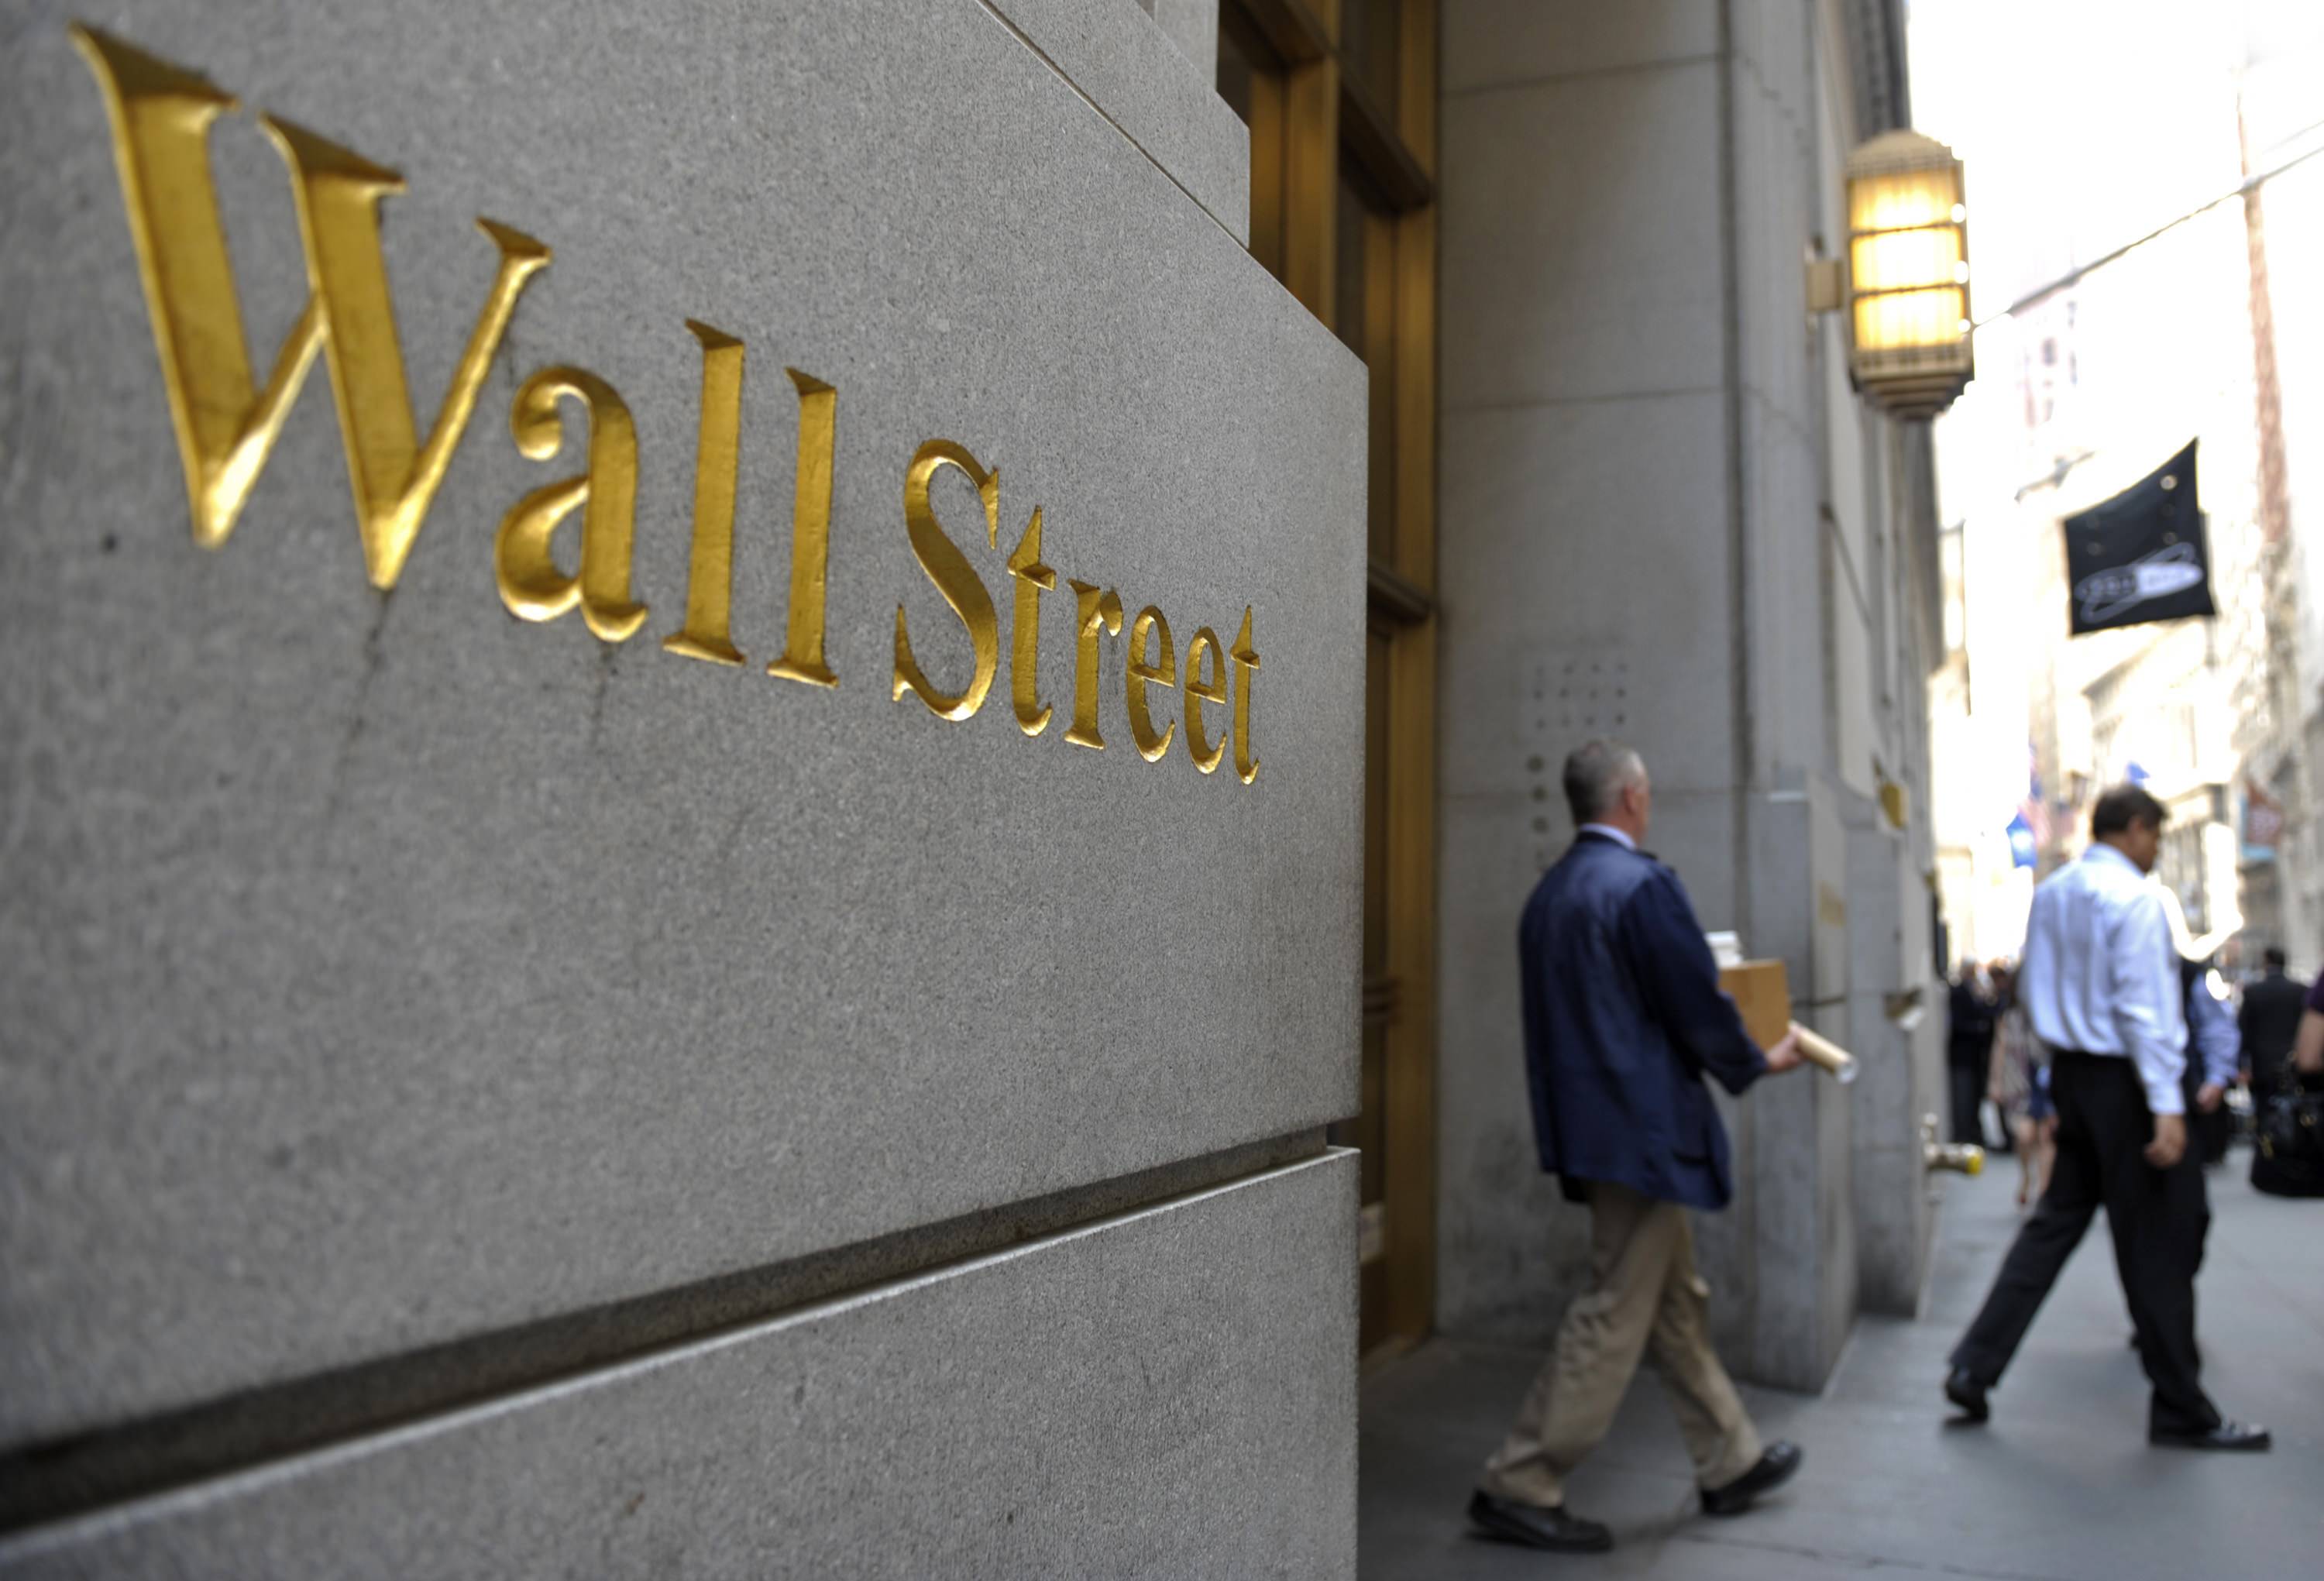 Regulators taking another look at costs of Wall Street safety rule